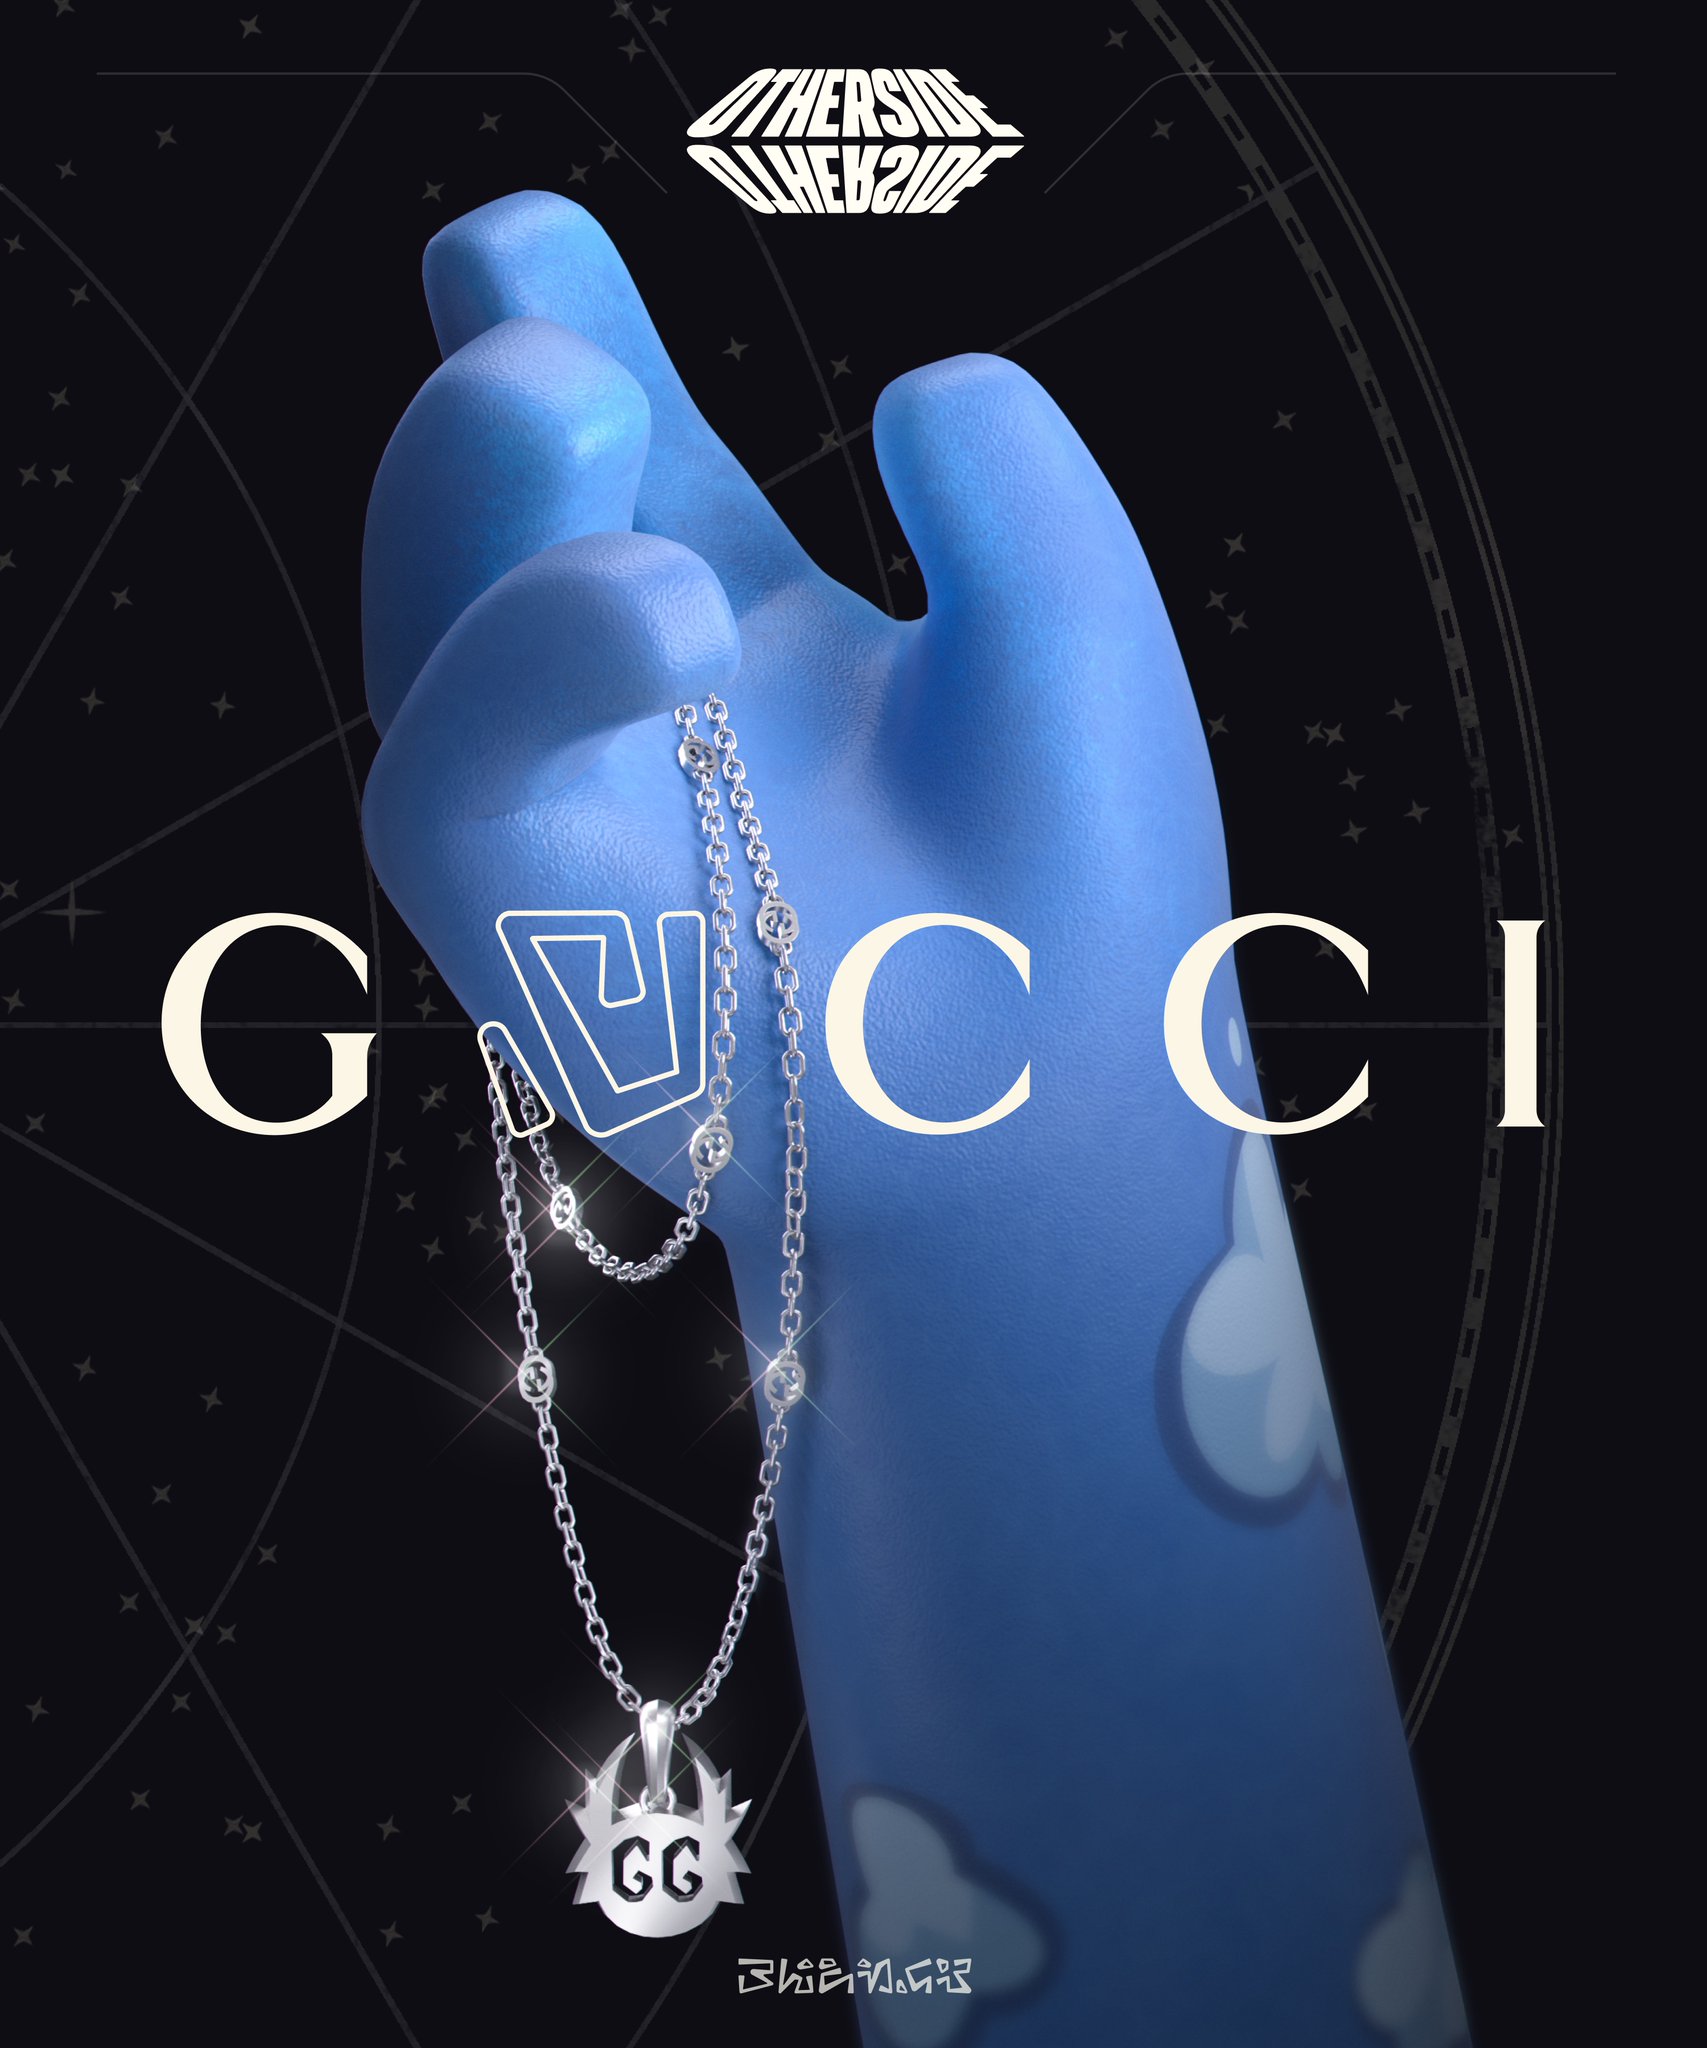 Othersidemeta on X: Our first discovery of Otherside Relics by @Gucci, is  a limited-edition Gucci-branded pendant of a Koda that pays homage to the  origins of Otherside.   / X